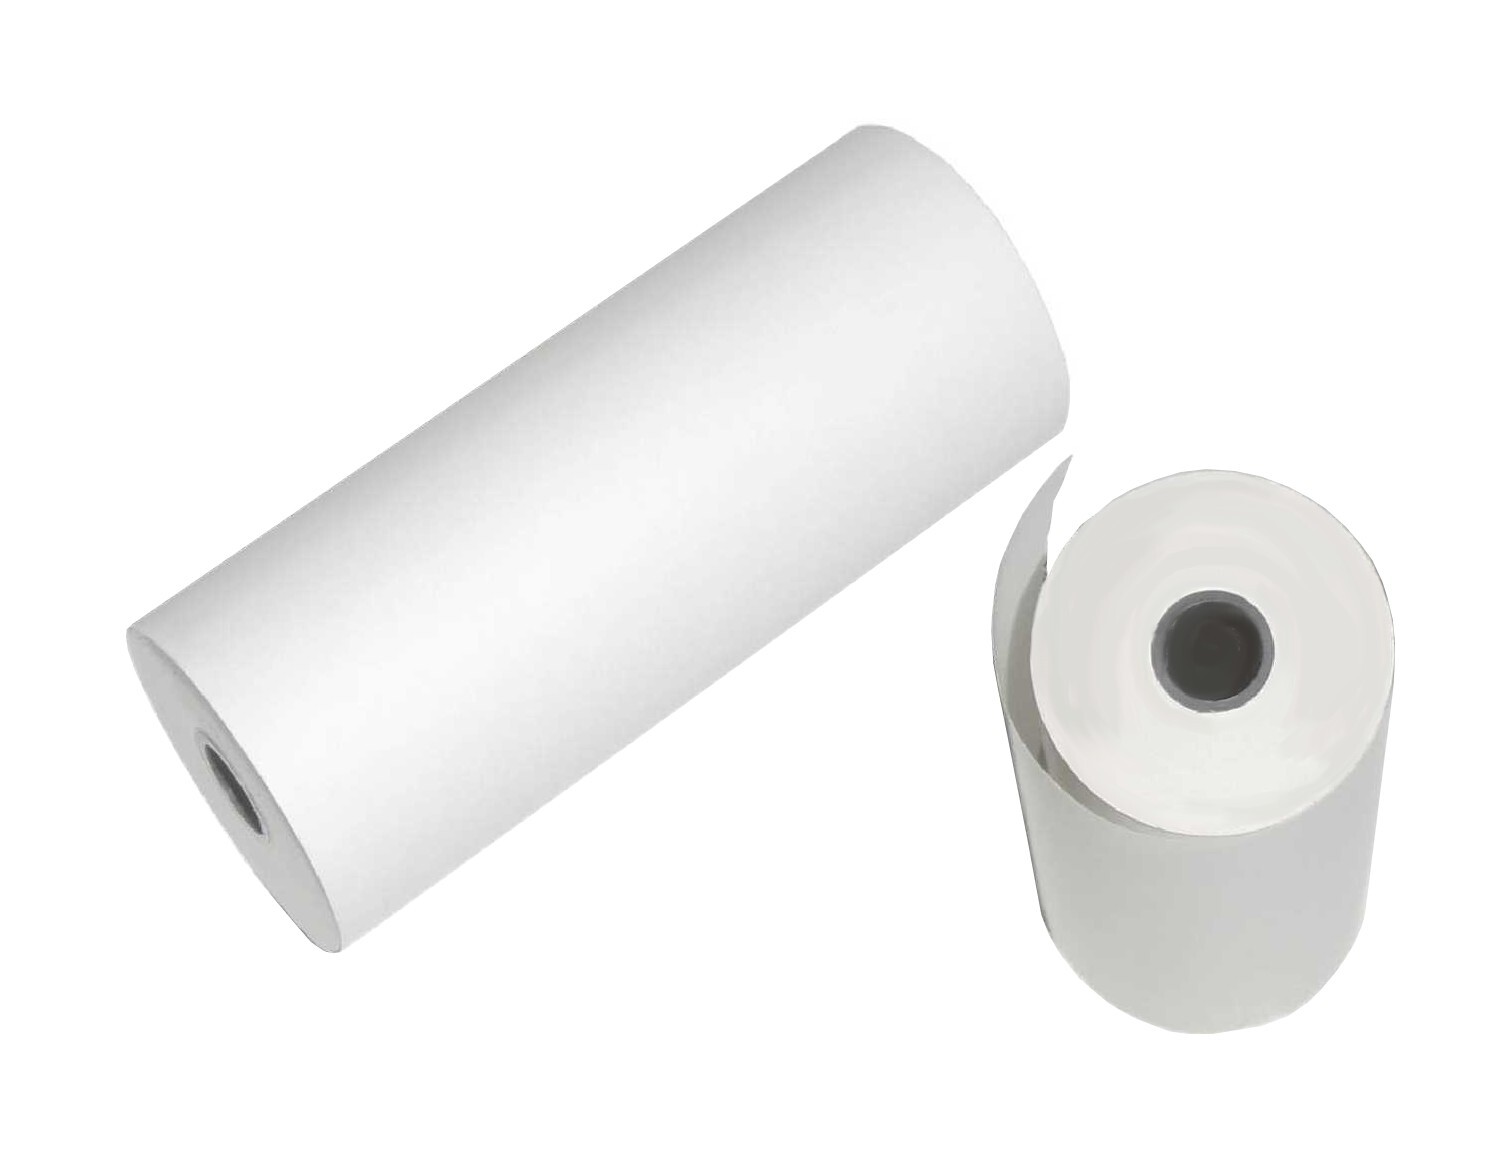 Paper roll for thermal printer IR 58 mm for HMG and SAFE
length approx. 11 m